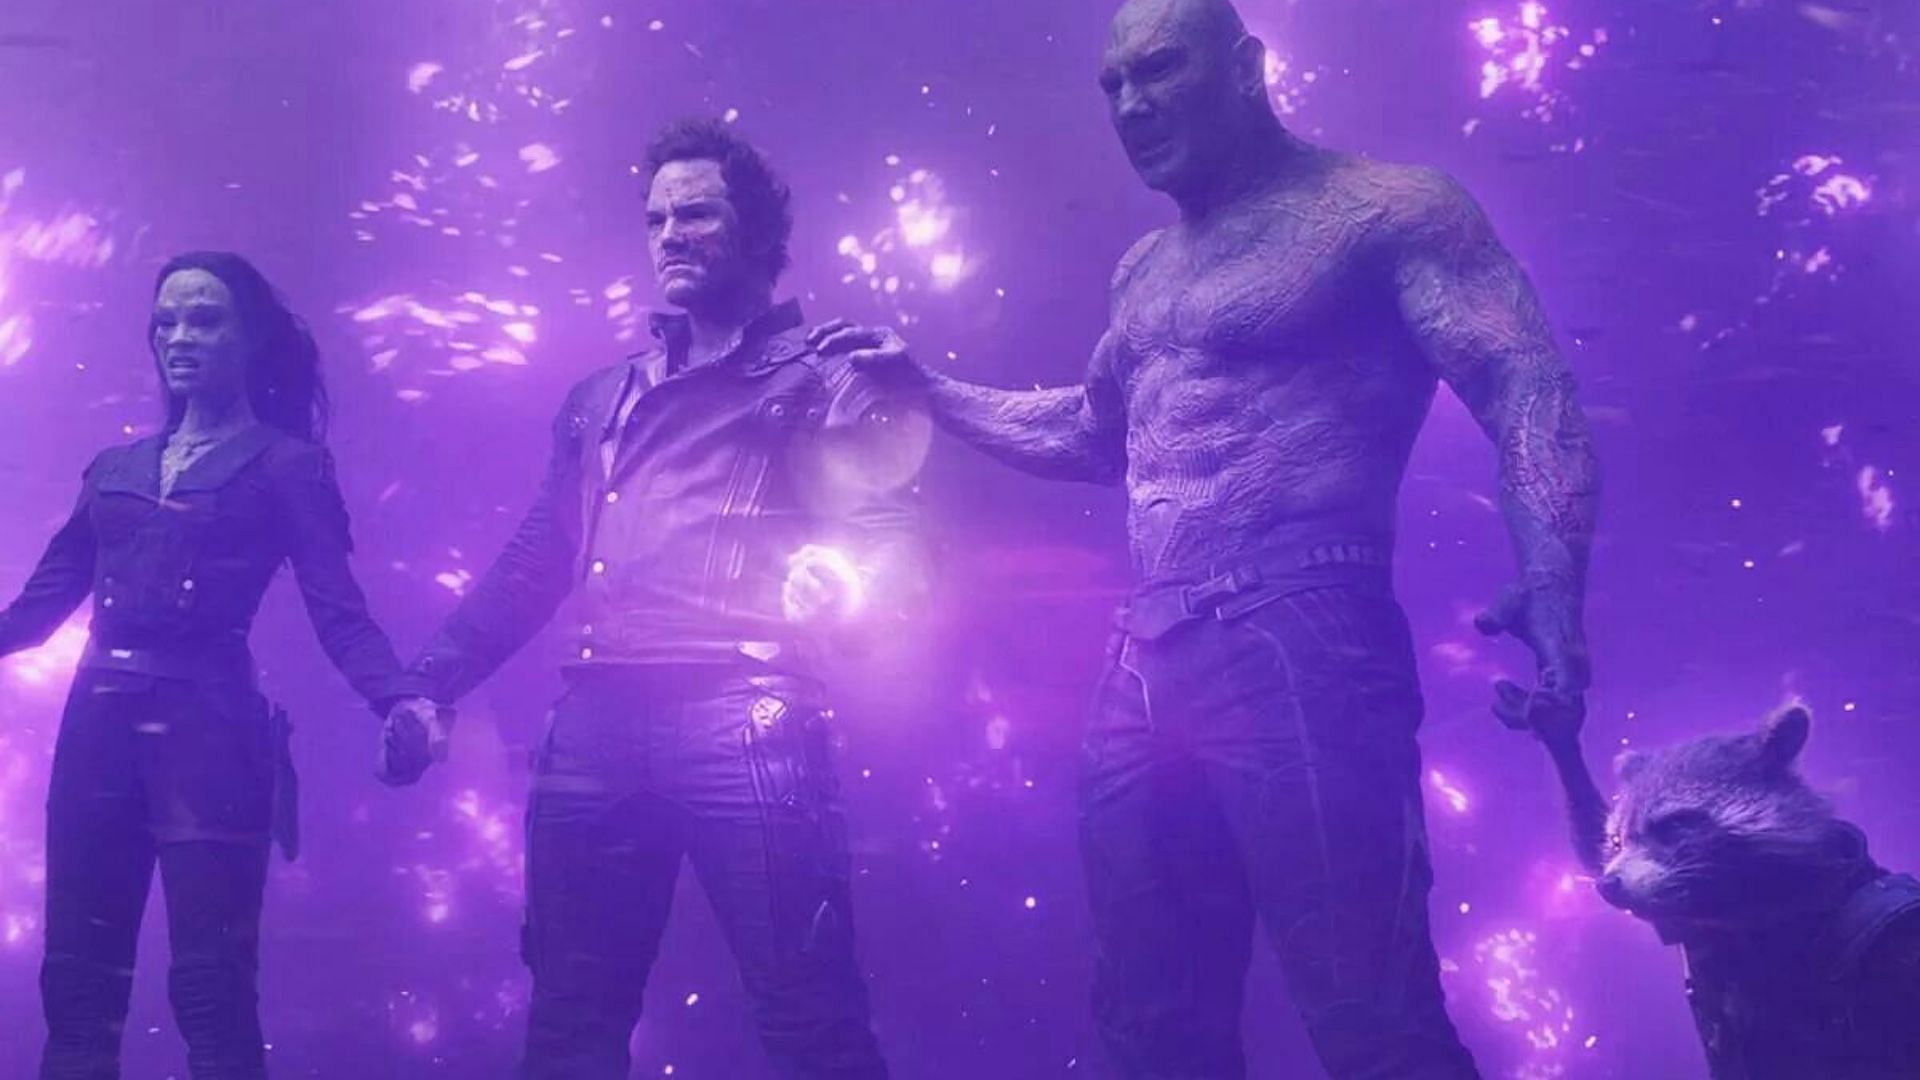 The Power Stone: The ultimate weapon in the Guardians of the Galaxy&#039;s battle (Image via Marvel Studios)